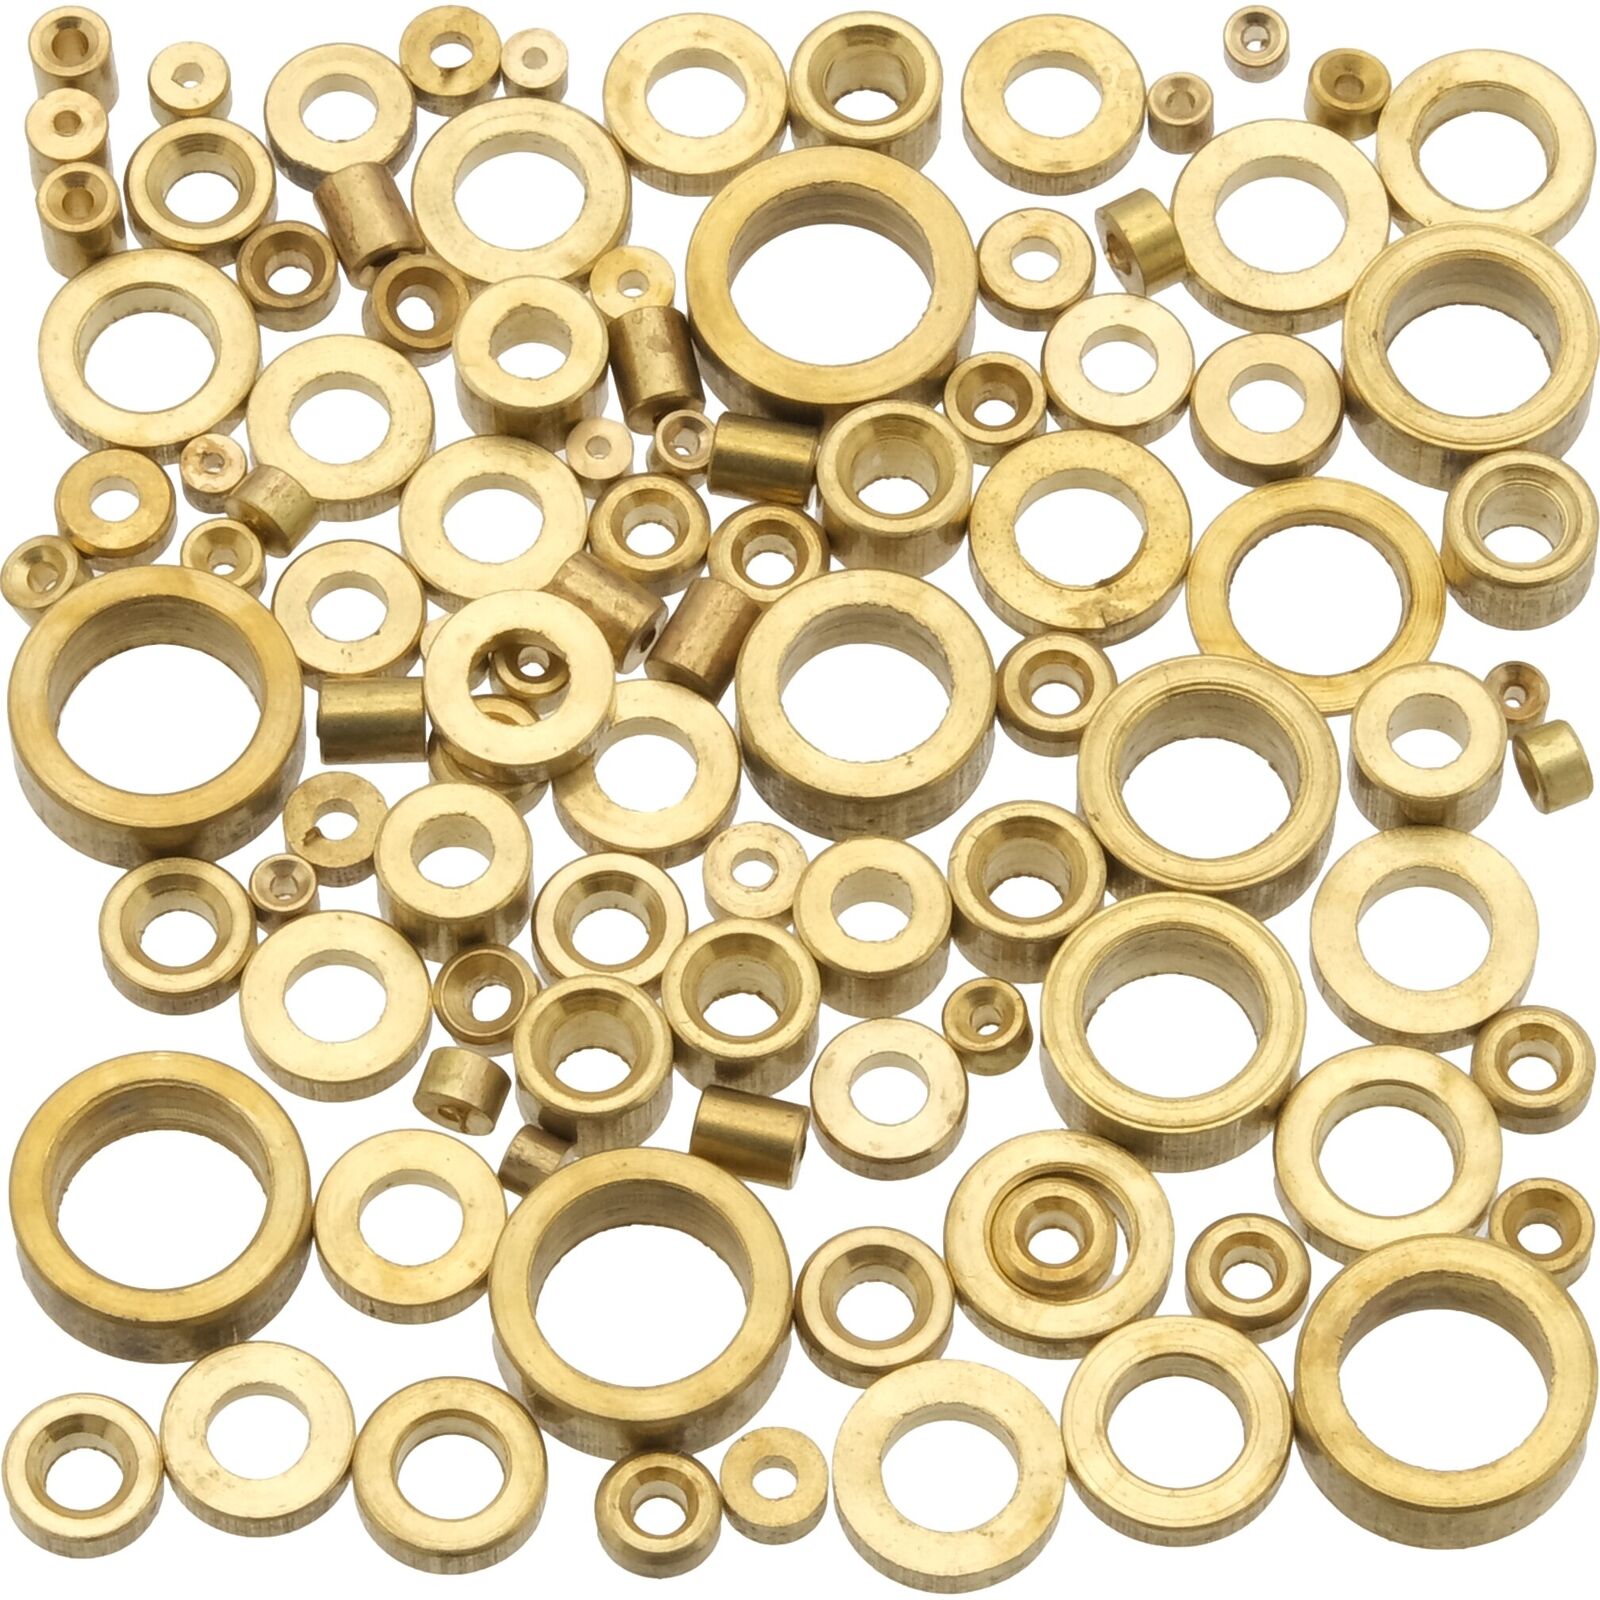 New 100pc Brass Bushing Assortment for Grandmother, Wall & Mantle Clocks 